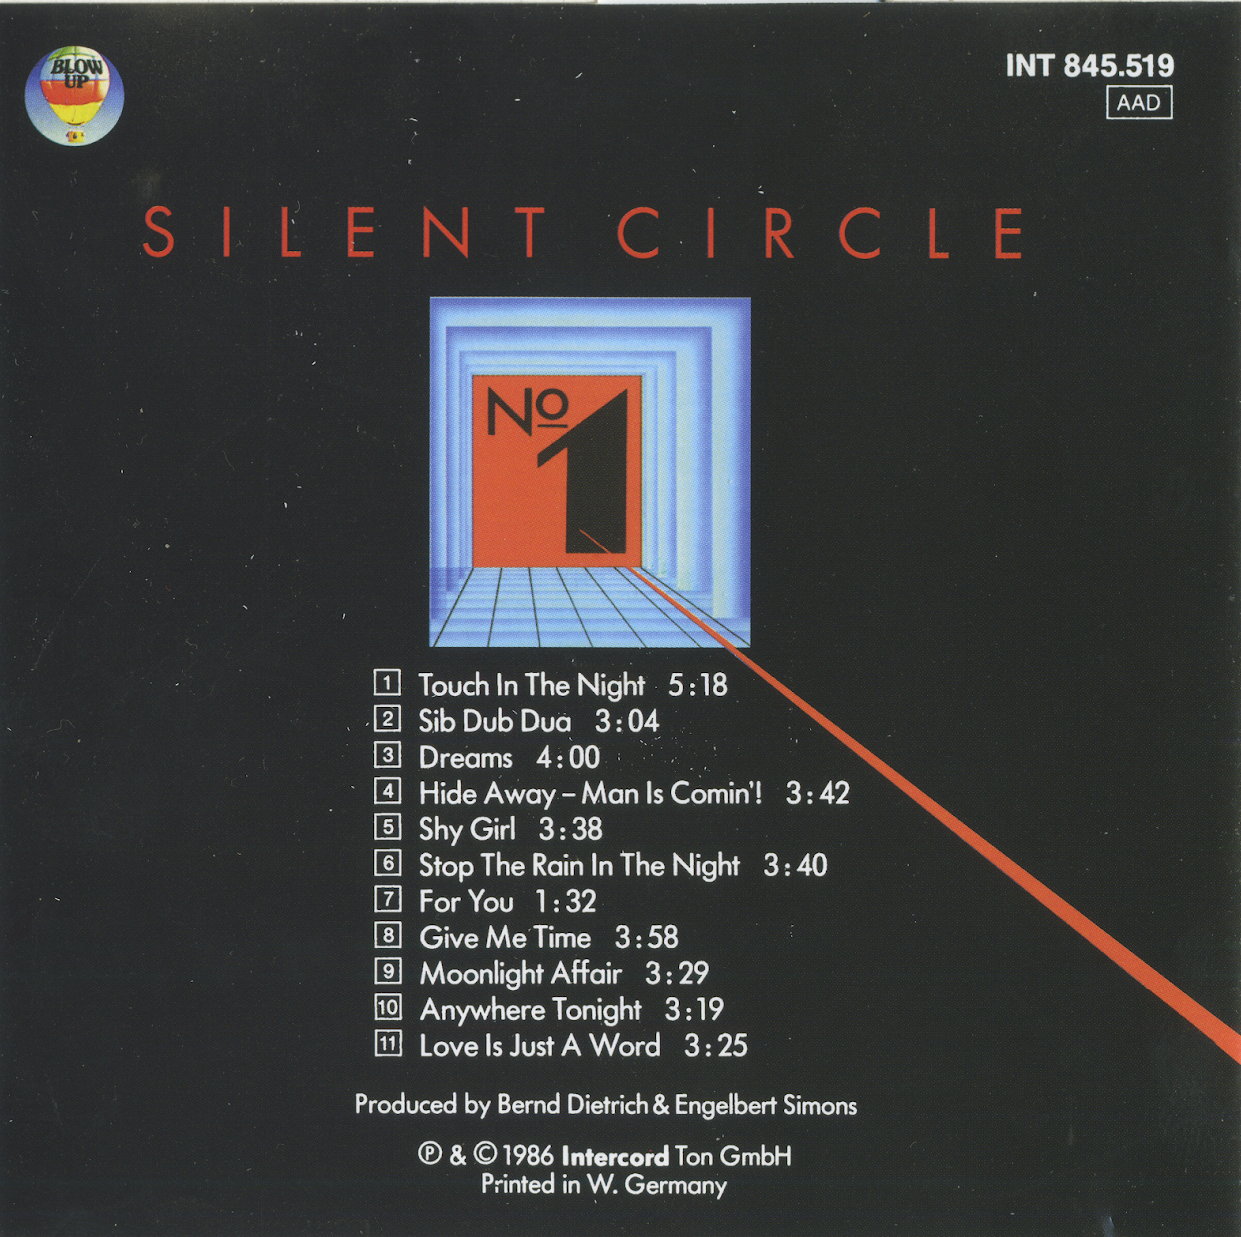 Silent circle 1986. Silent circle no. 1. Silent circle n1 1986 CD. Silent circle 1986 no.1 обложка альбома. Песня silent circle touch in the night